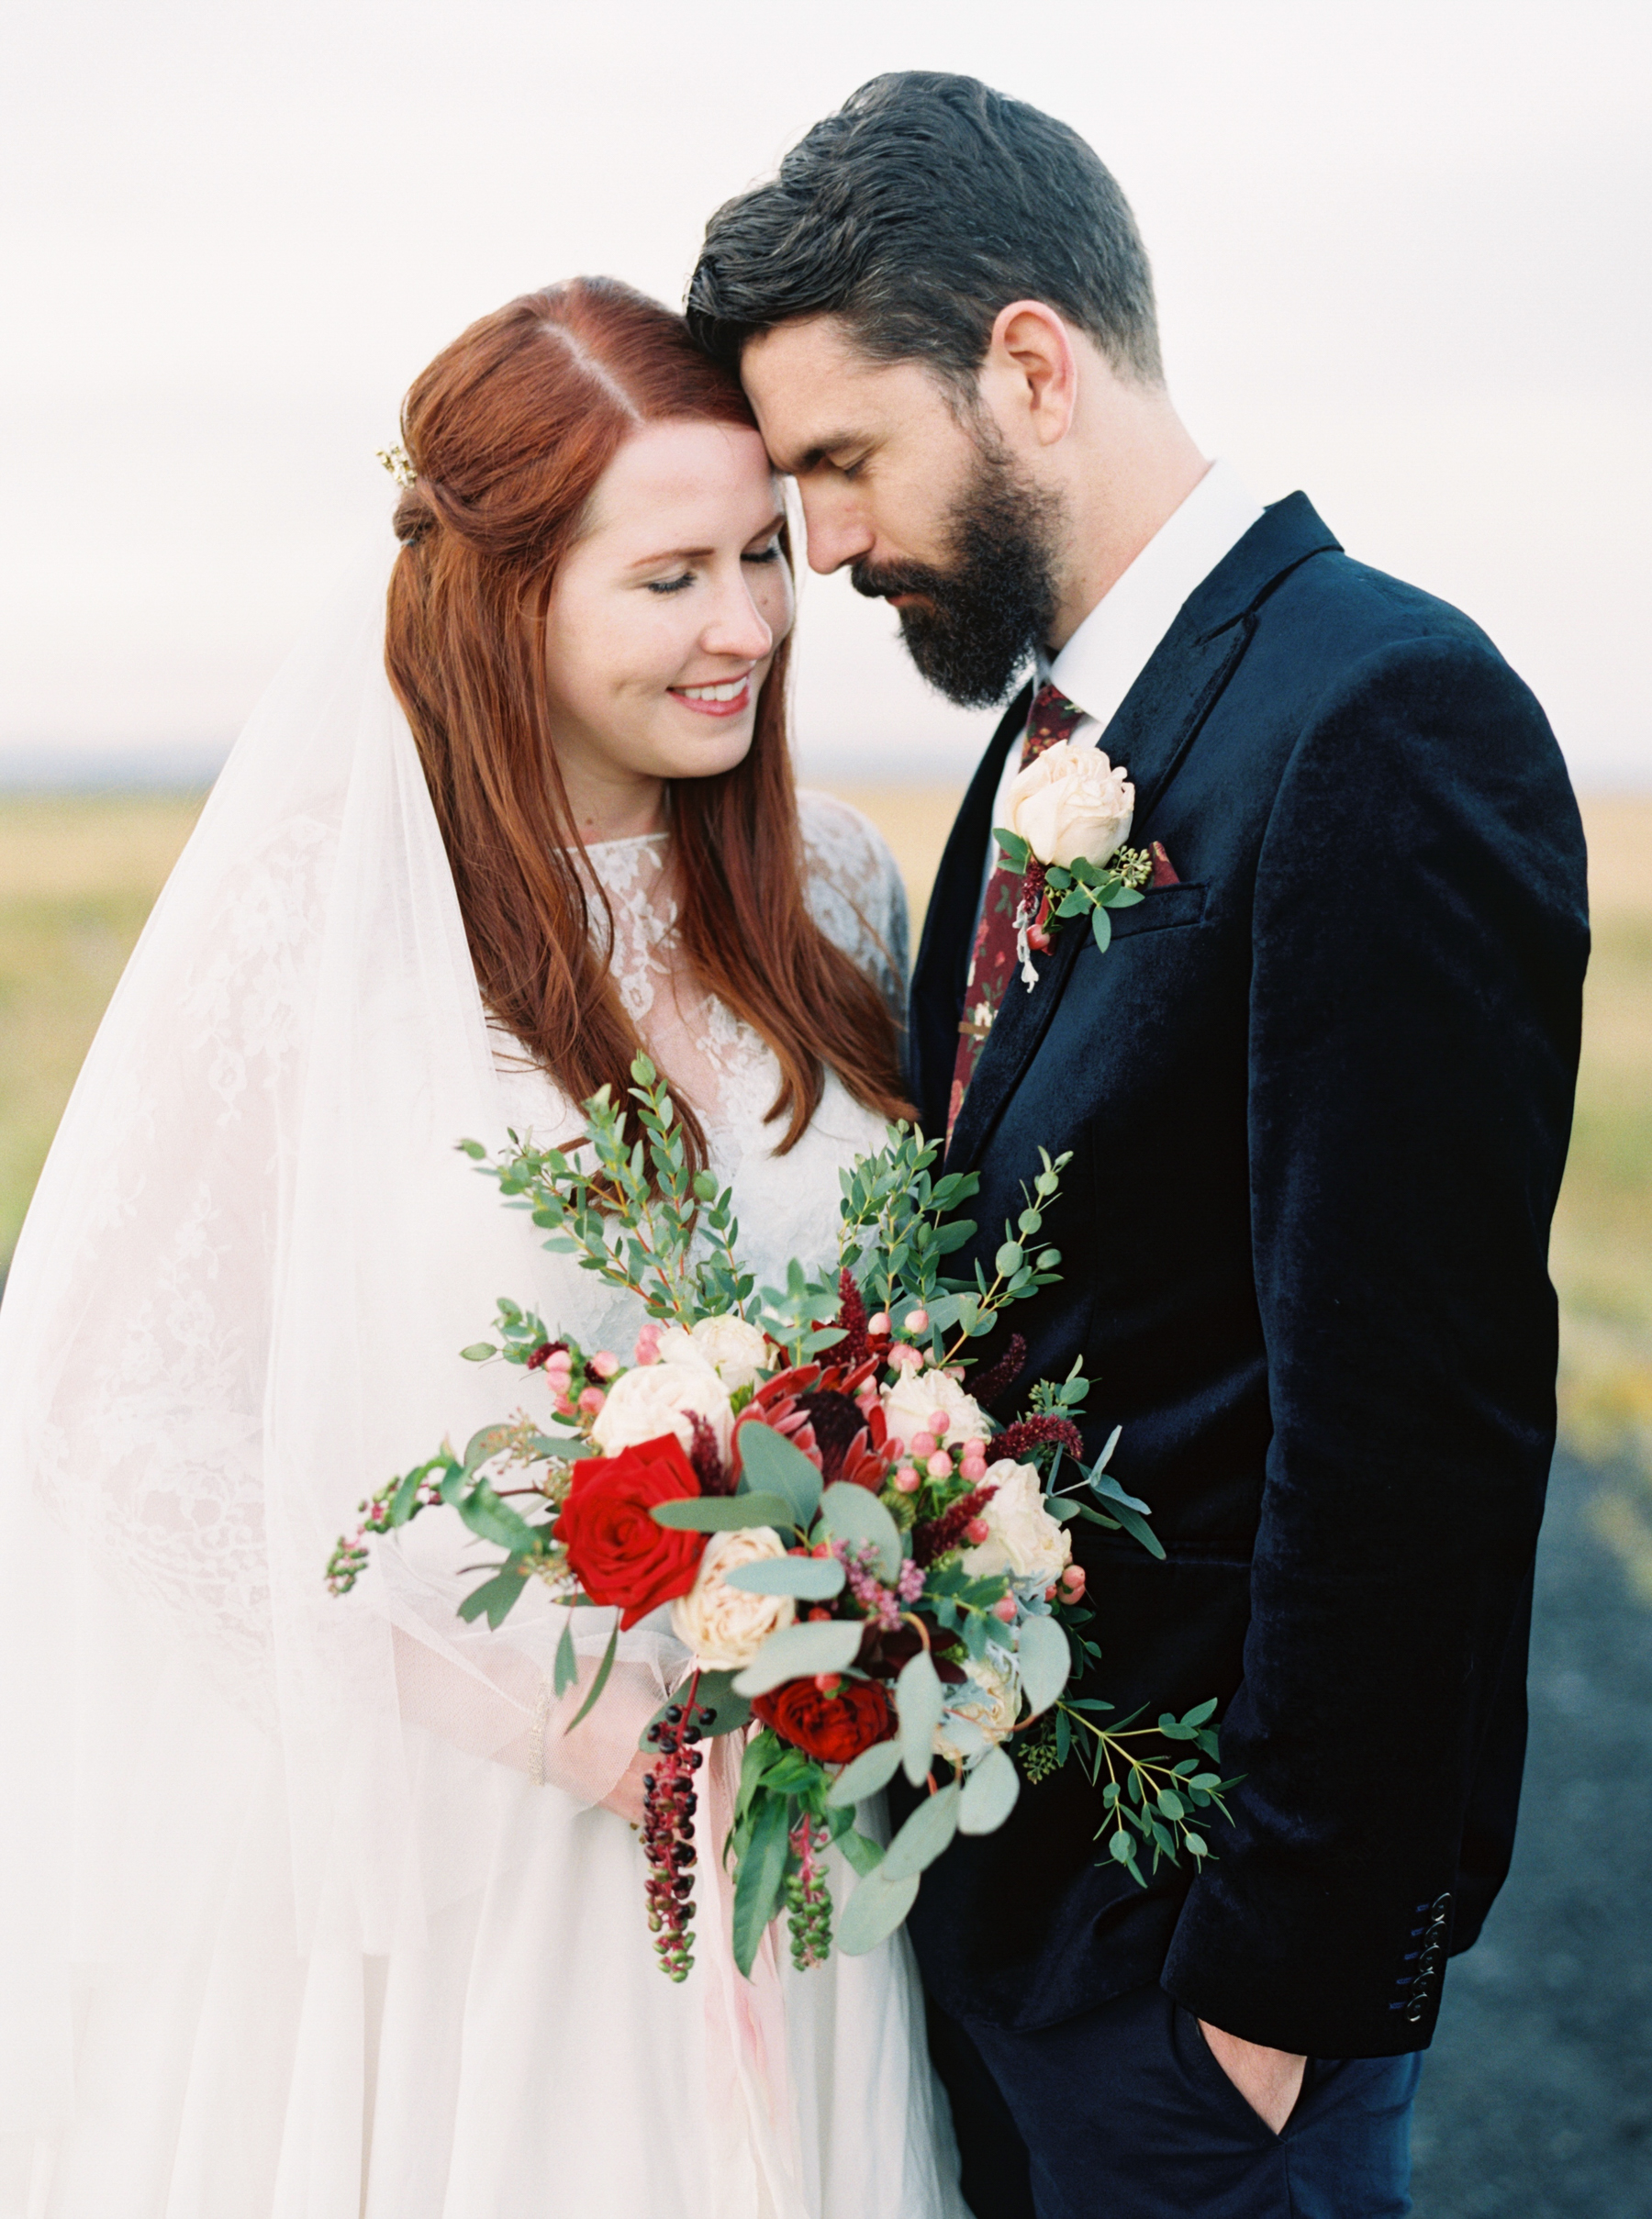 Iceland Wedding At Hotel Budir & the Black Church bride holding bouquet with red roses and greenery